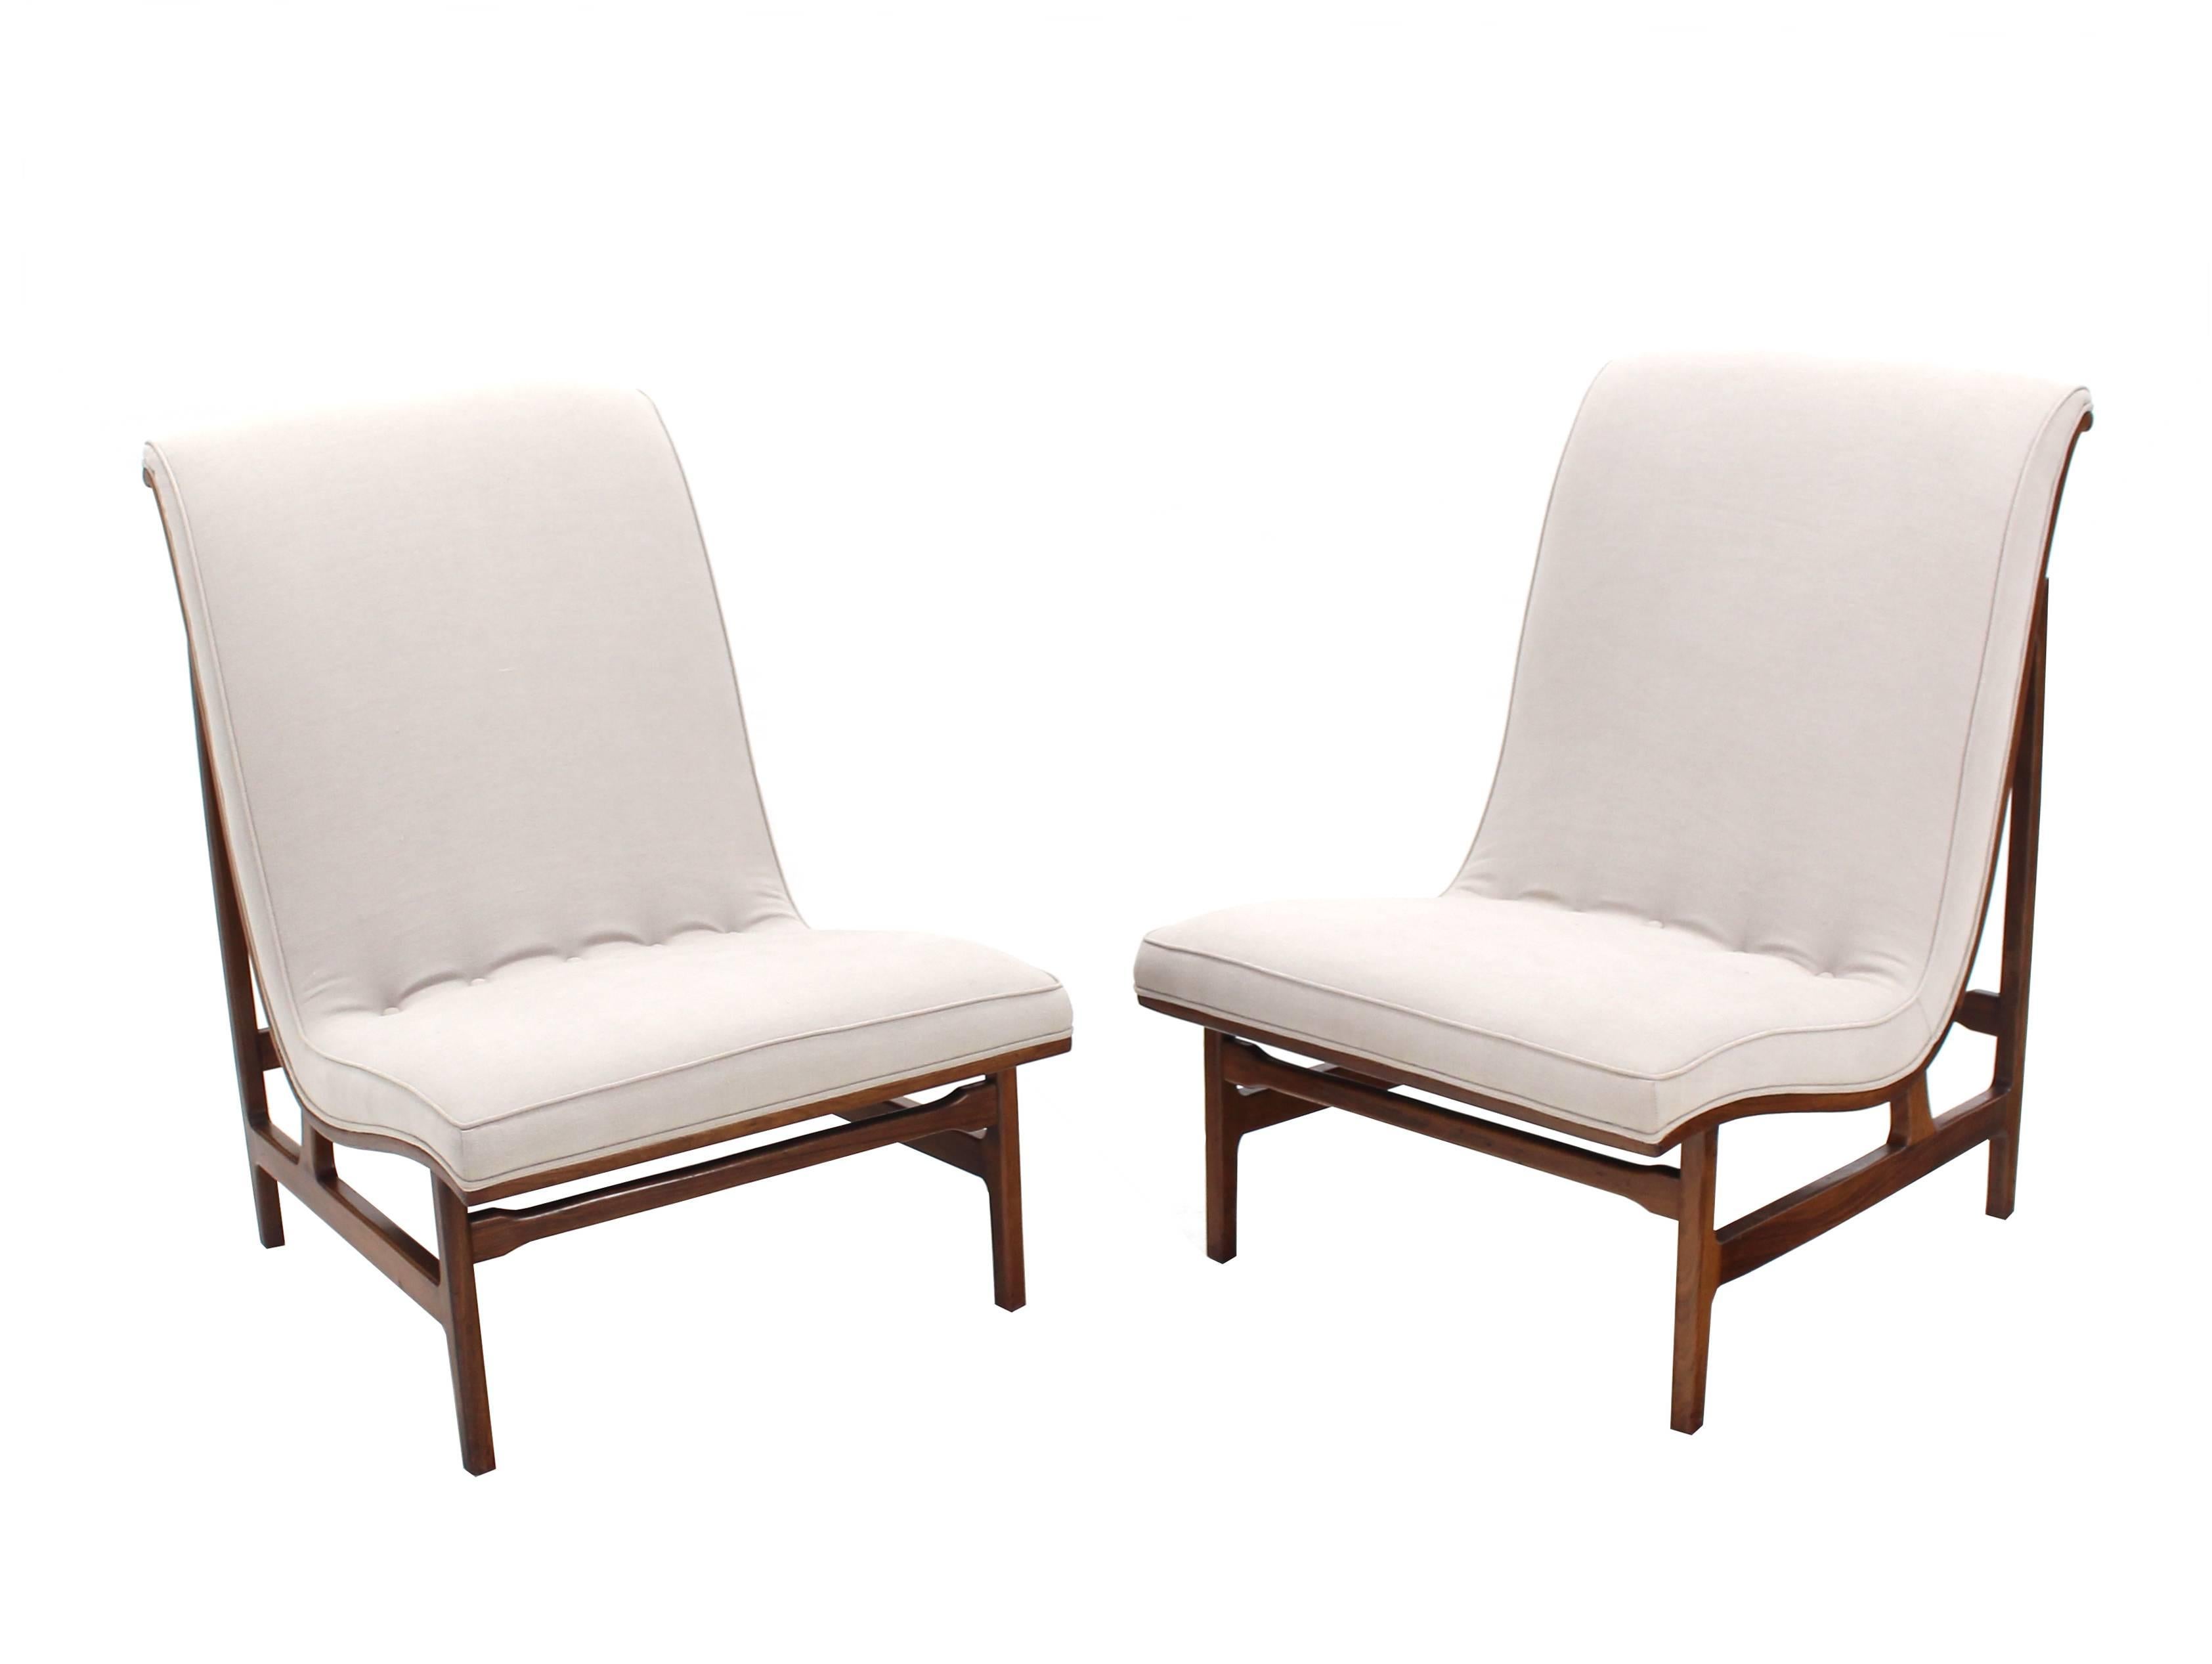 Pair of very nice Mid-Century modern chairs with new upholstery.